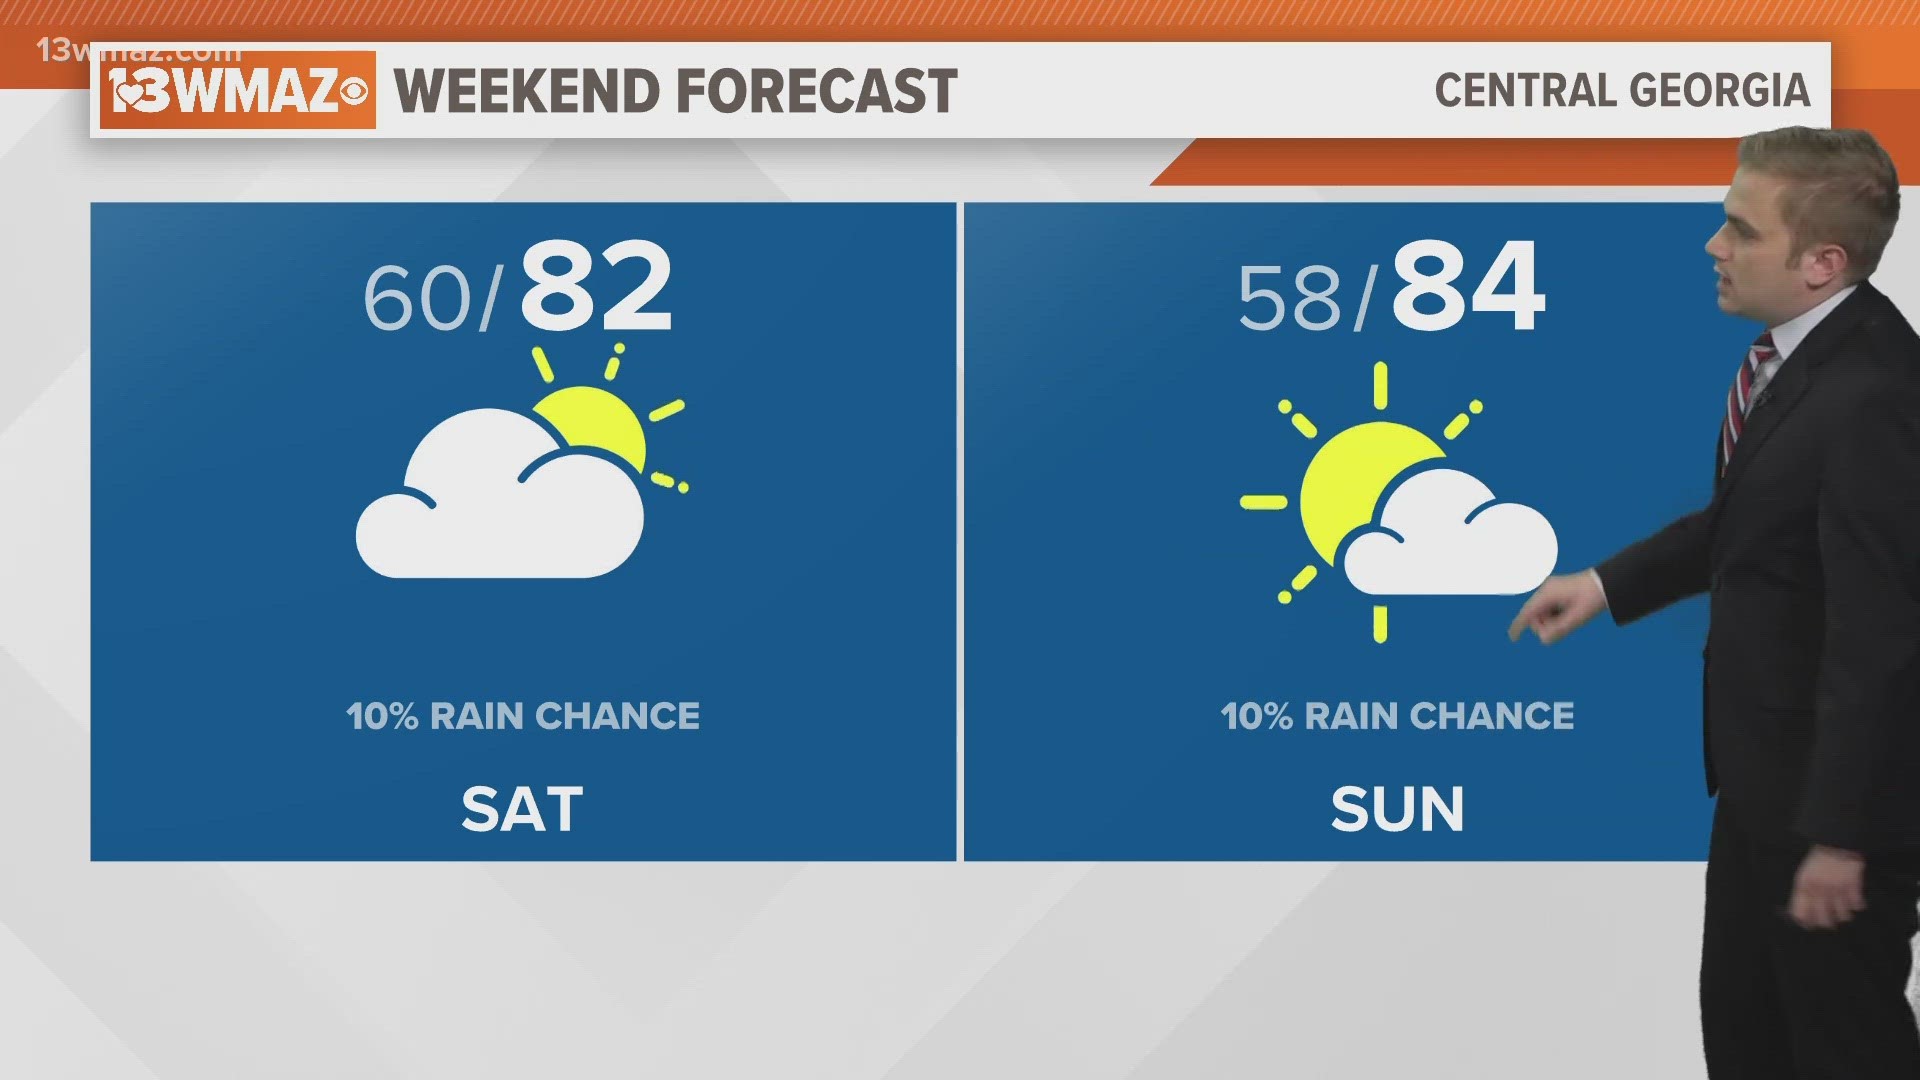 A great weekend forecast is shaping up!